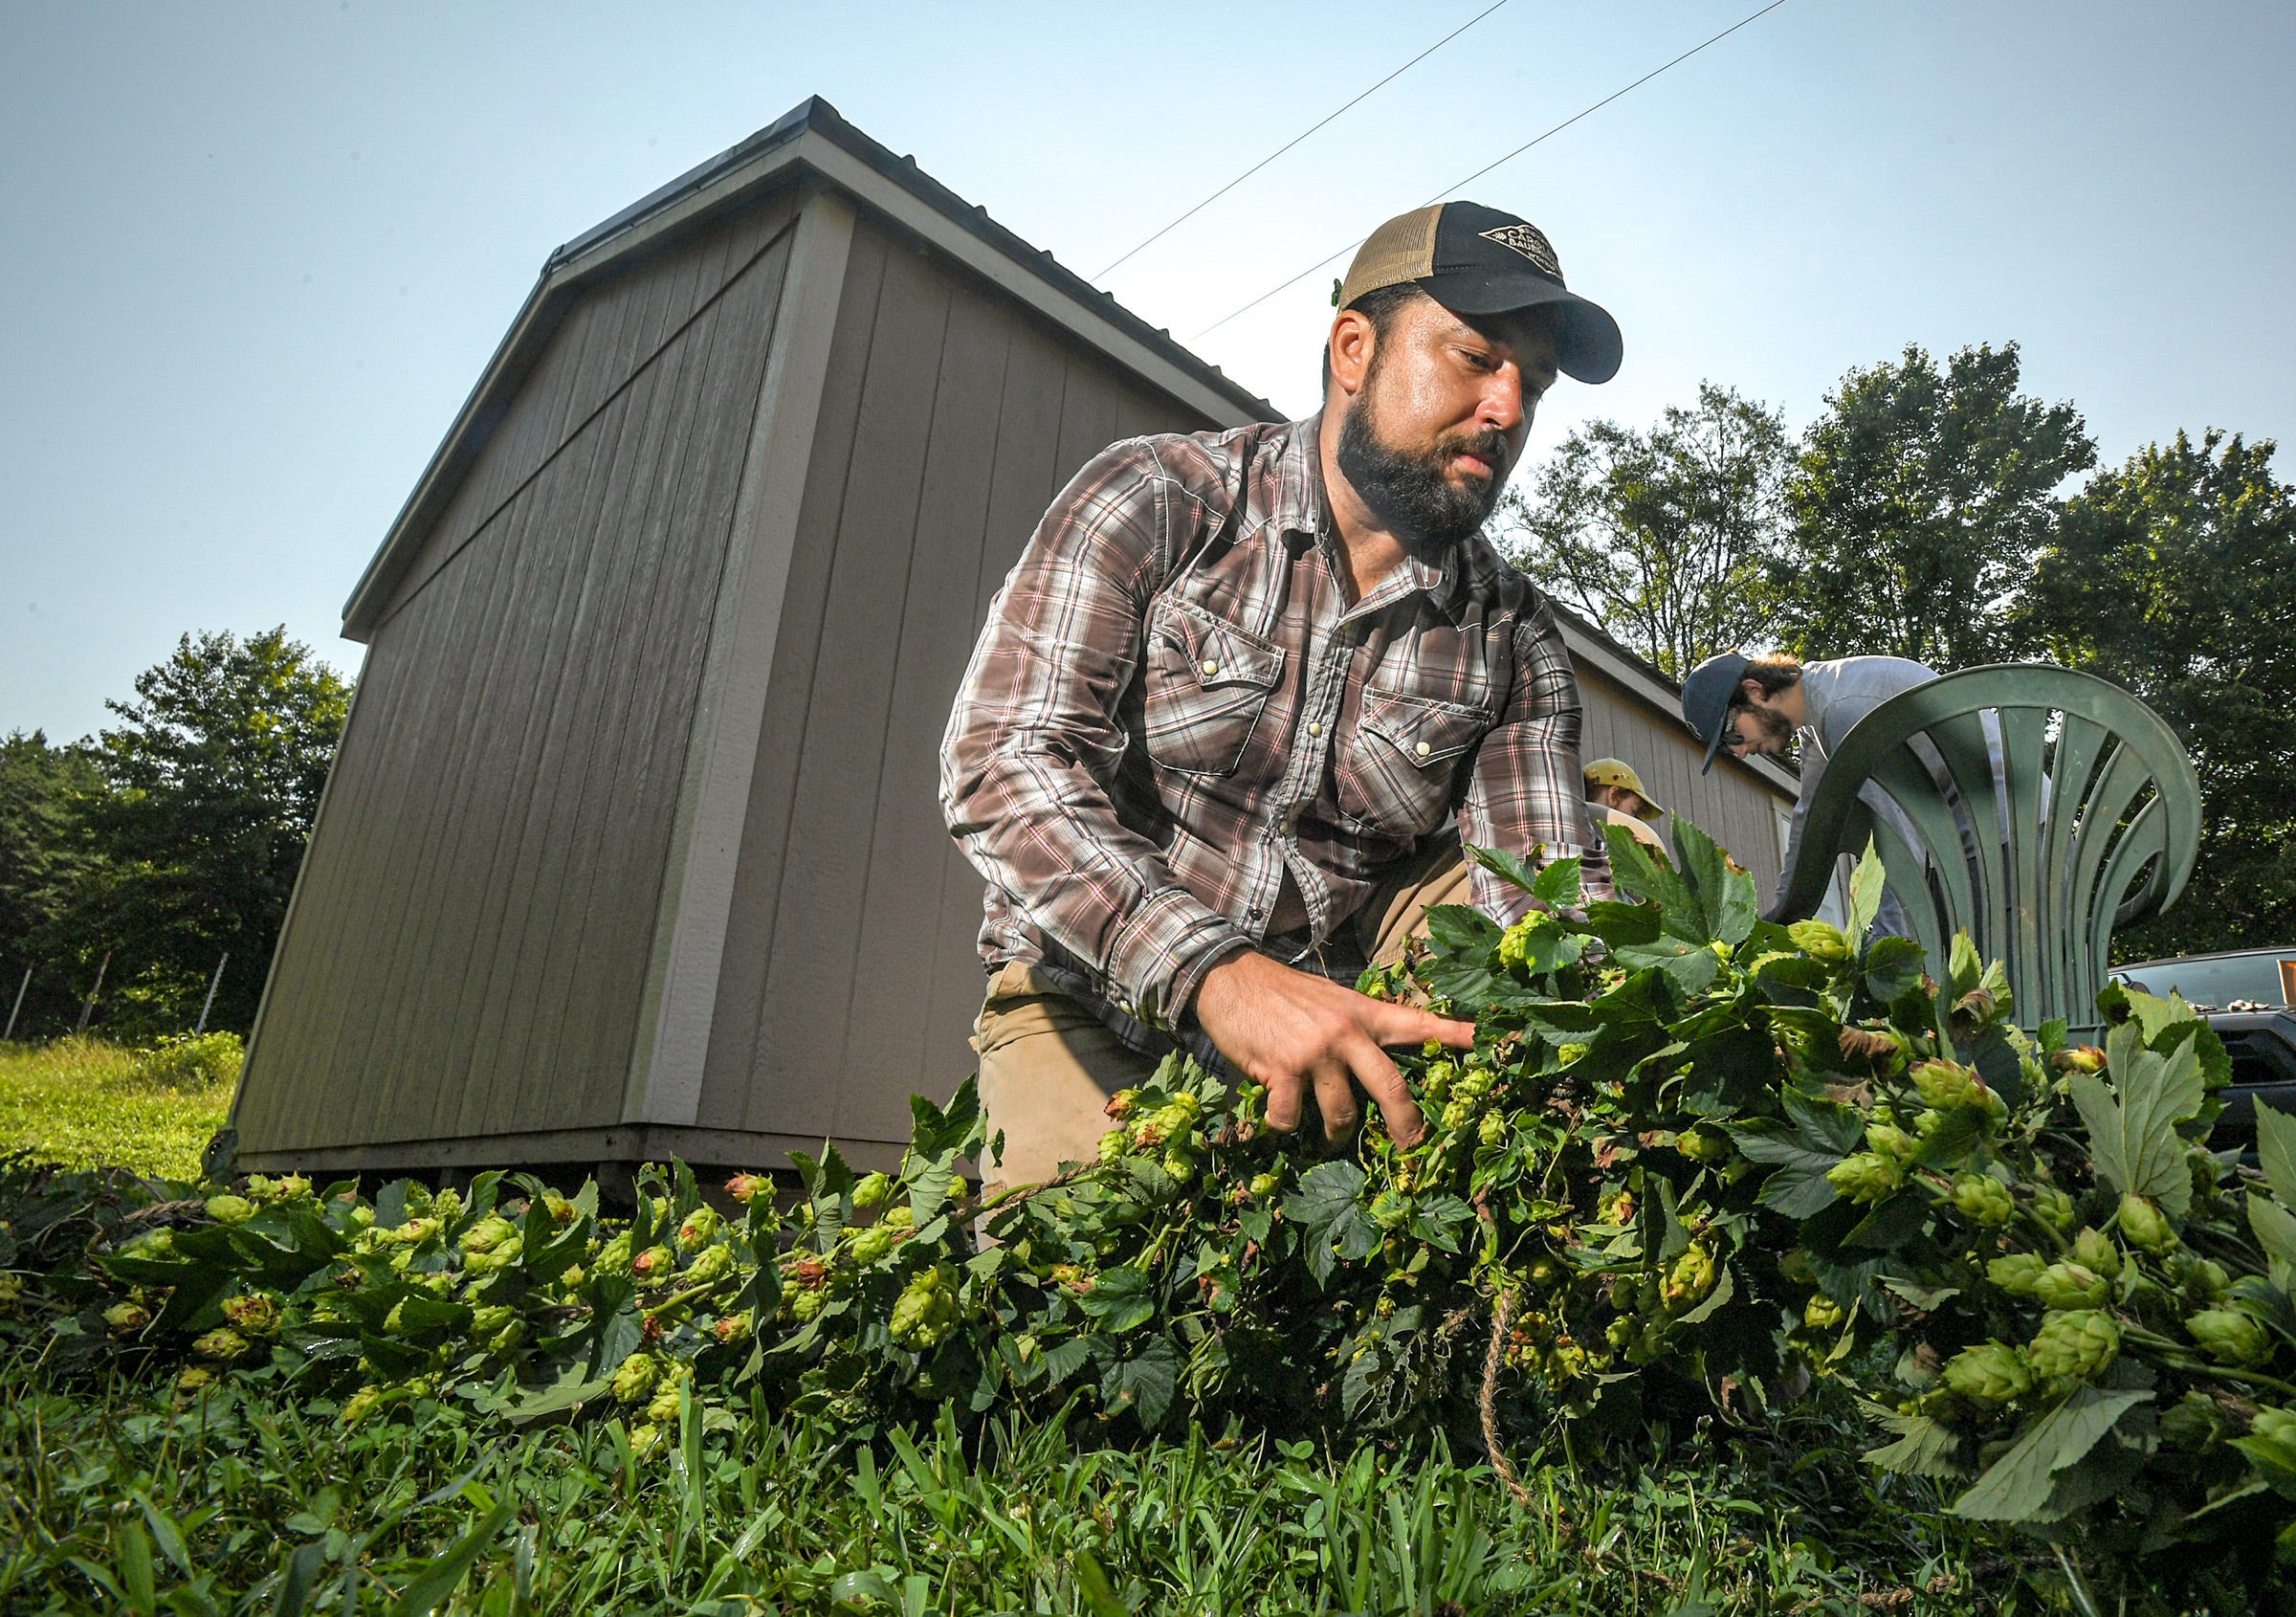 David Thornton, co-owner of Carolina Bauernhaus Brewery & Winery, with locations in Anderson and Greenville, S.C. harvests hops at the Oconee Hop Farm in Salem, S.C. Tuesday, July 27, 2021. 